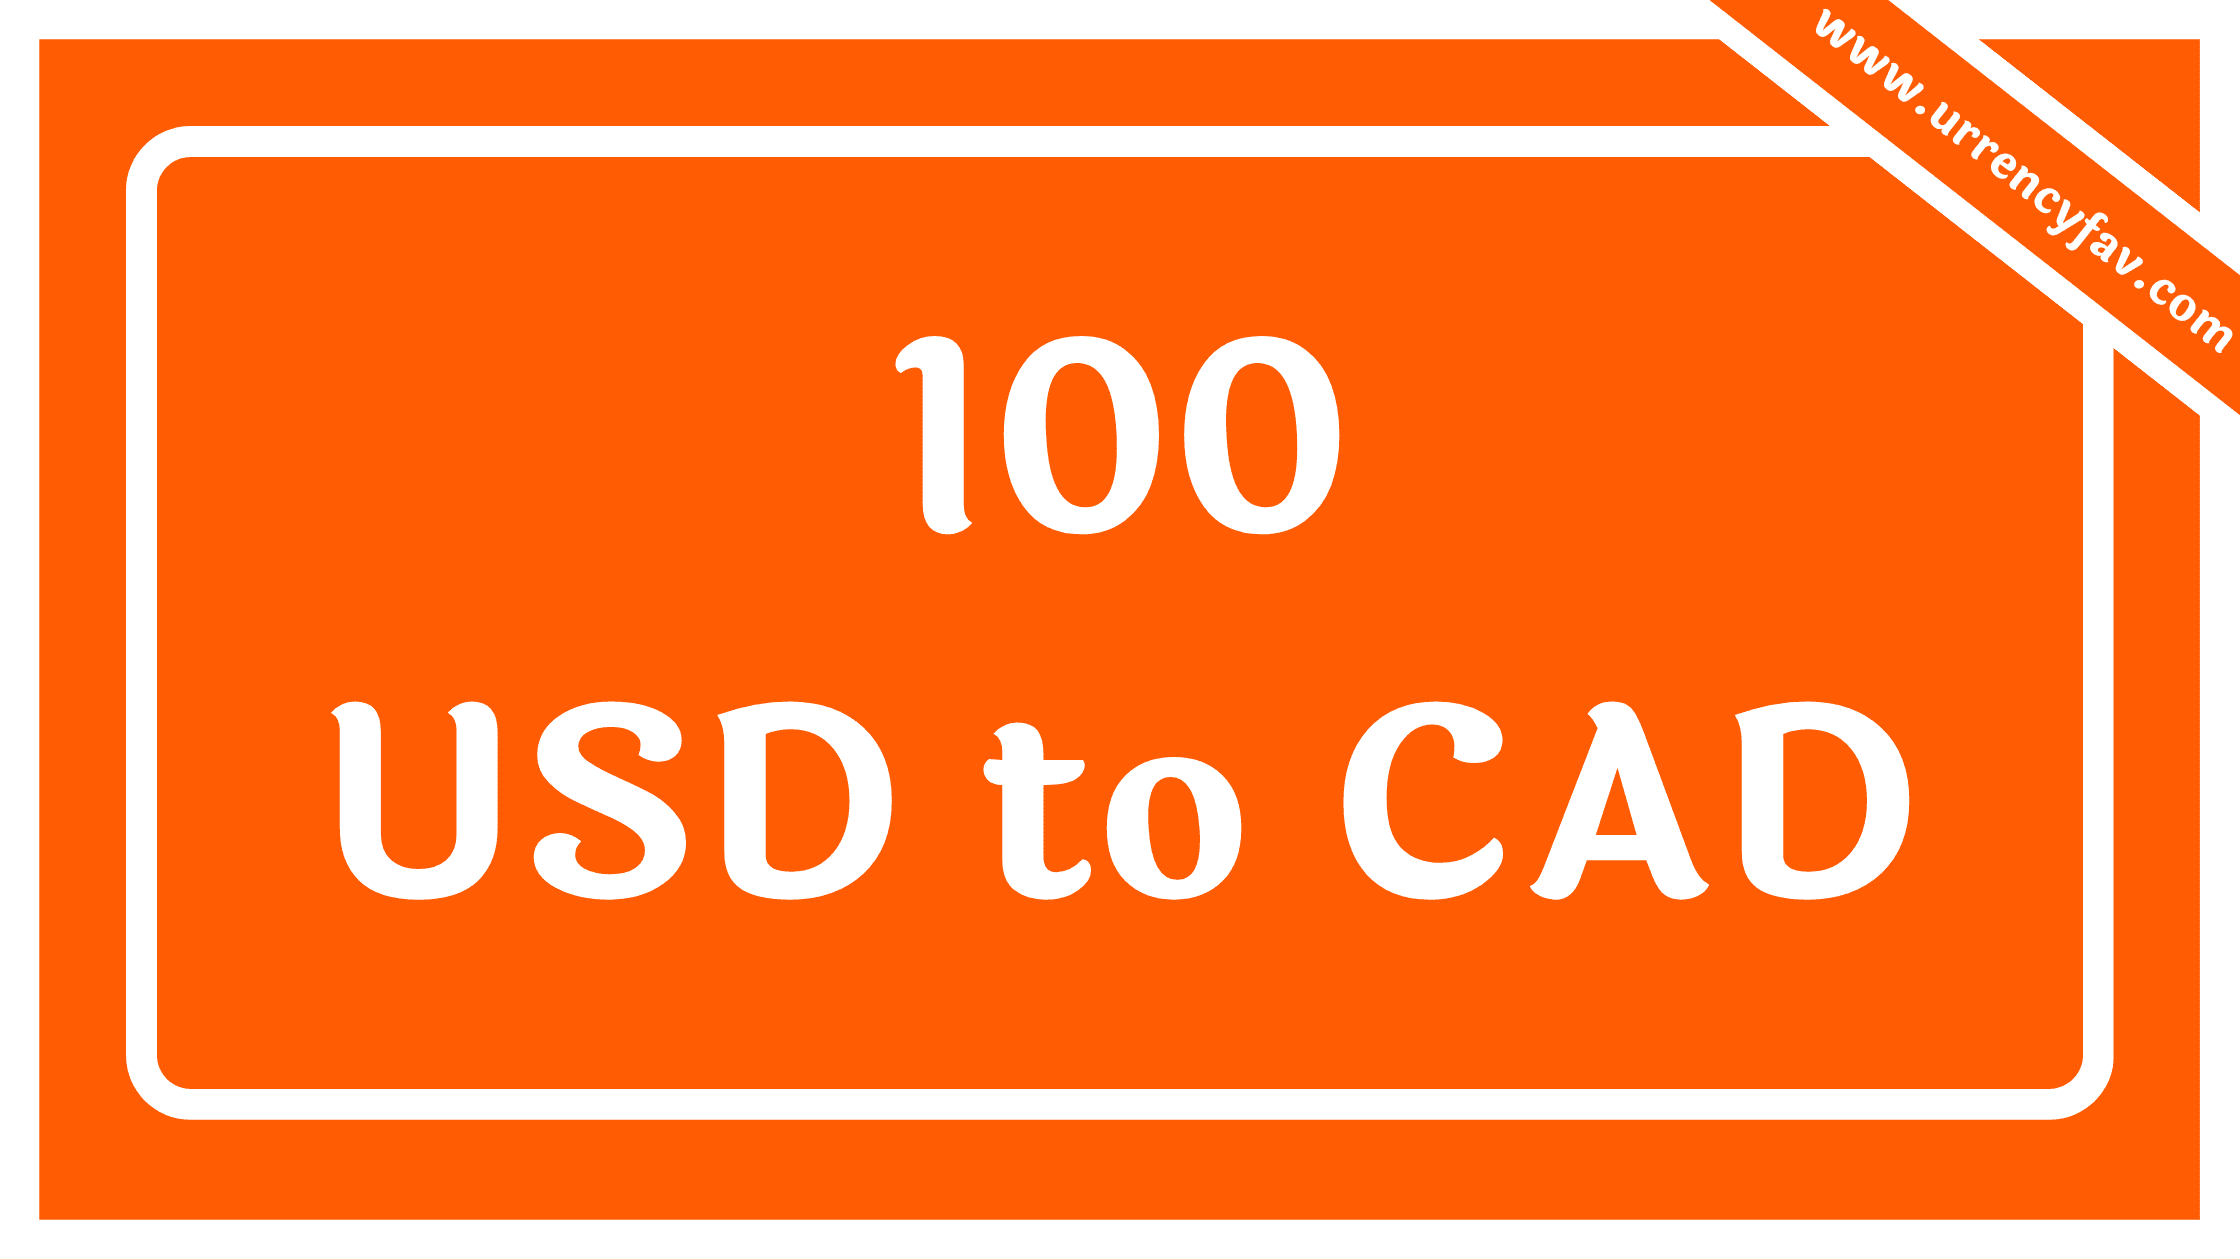 100 USD to CAD